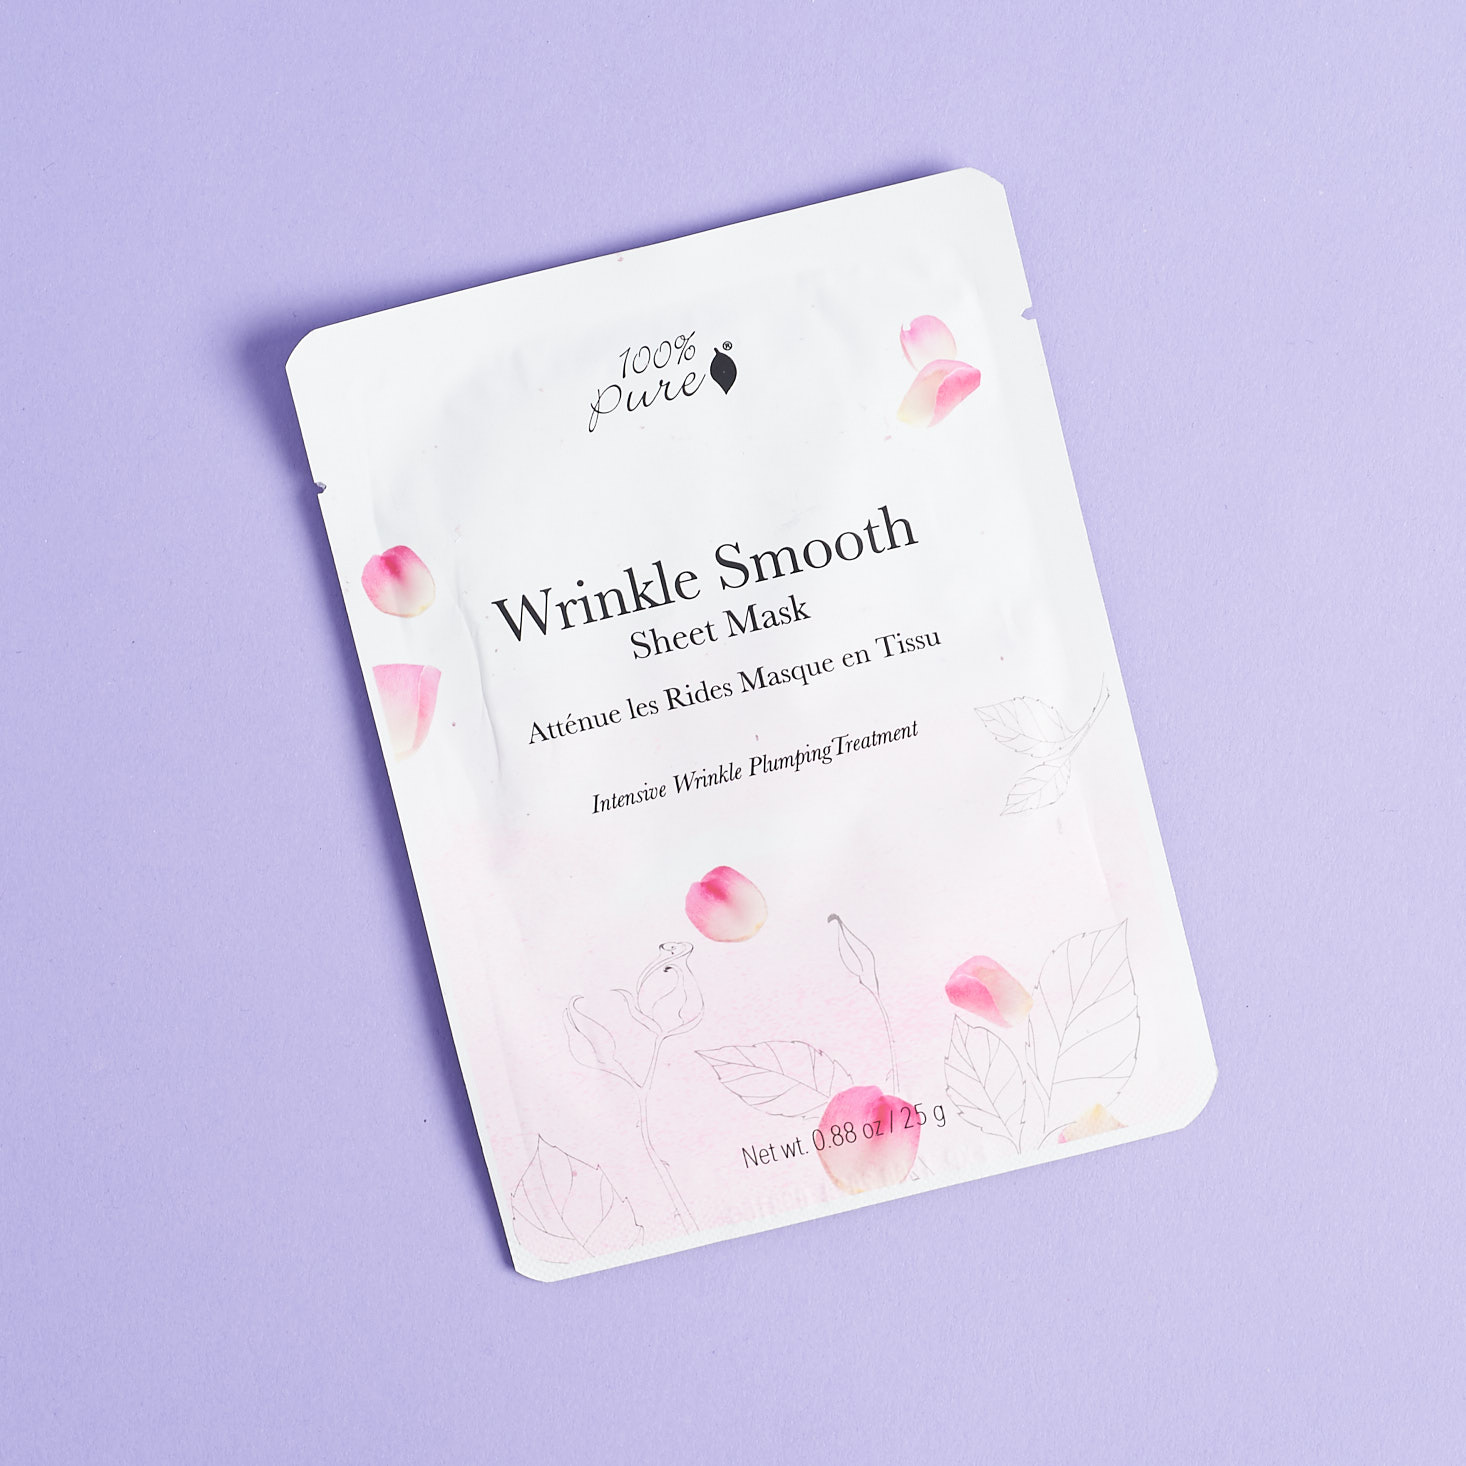 100% PURE SHEET MASK IN WRINKLE SMOOTH